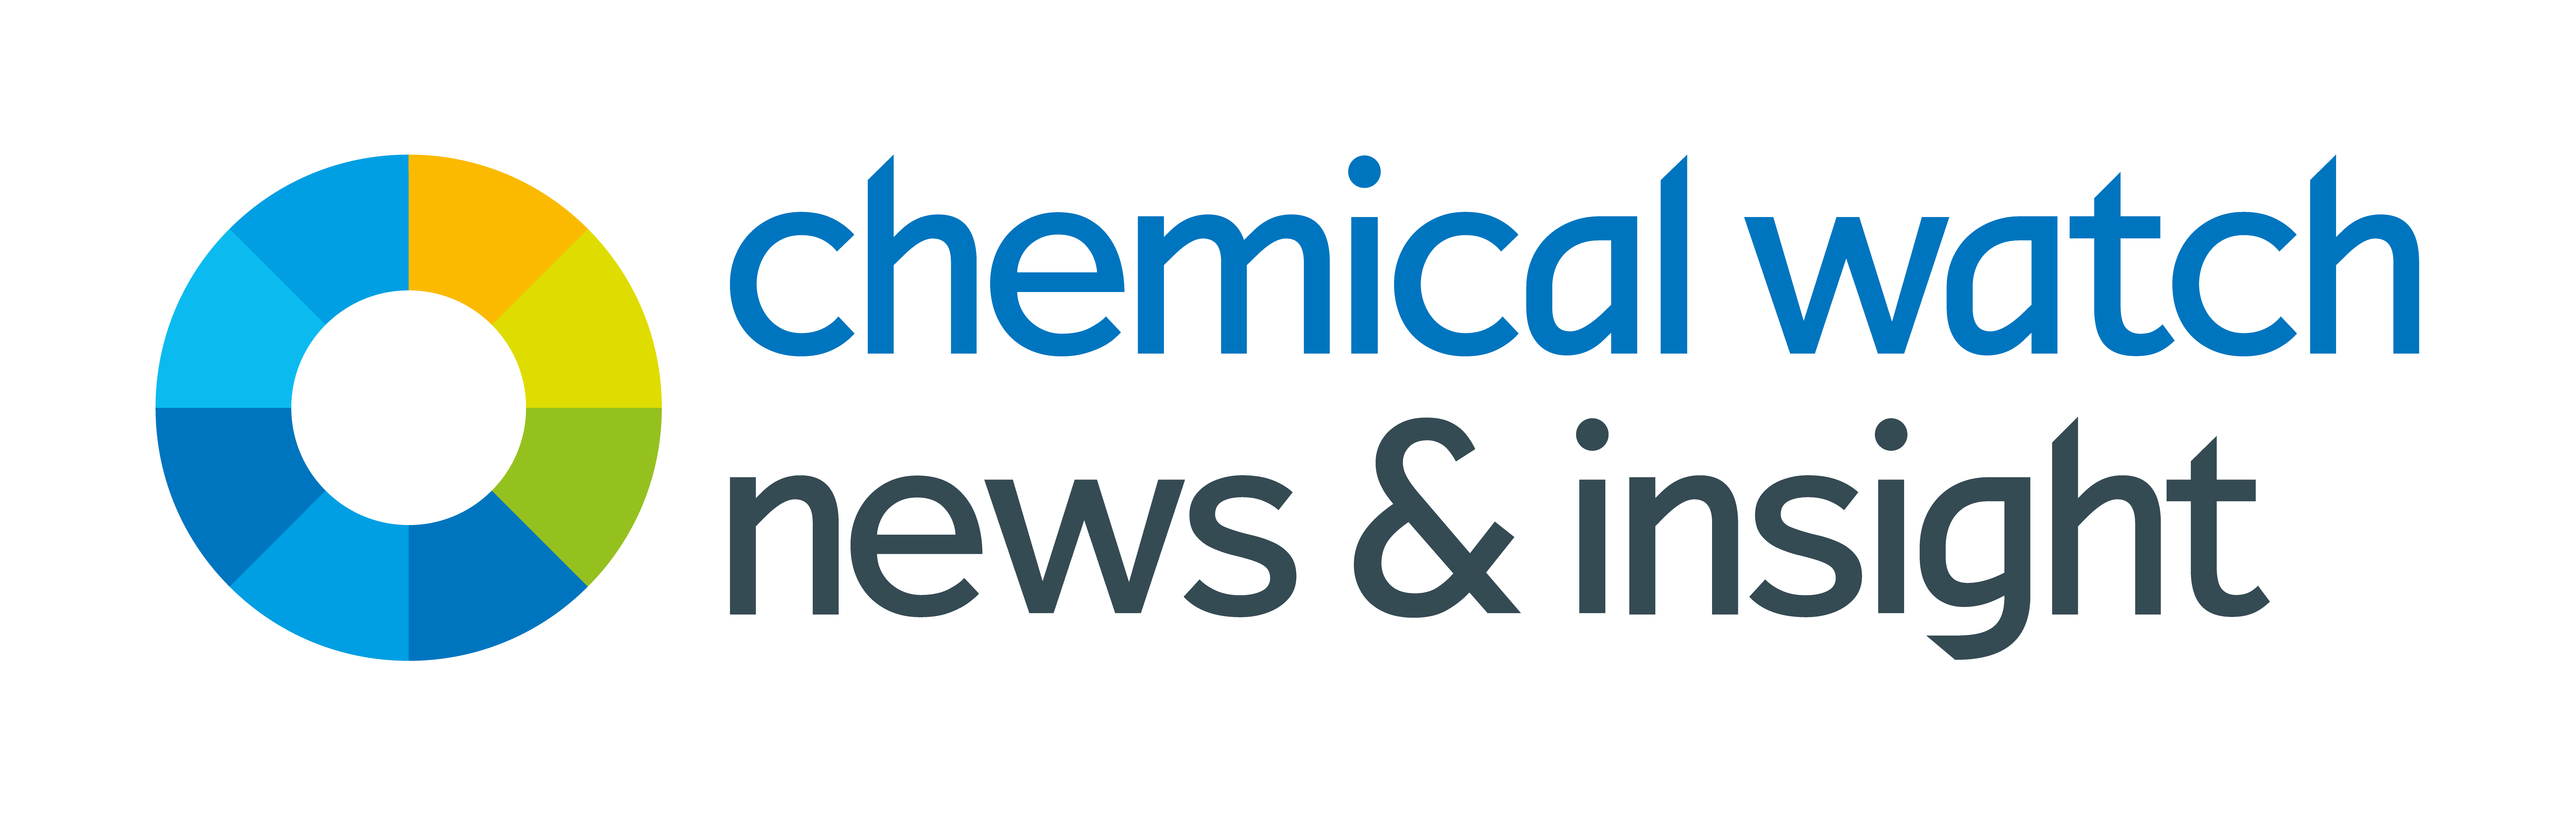 Chemical Watch News & Insight